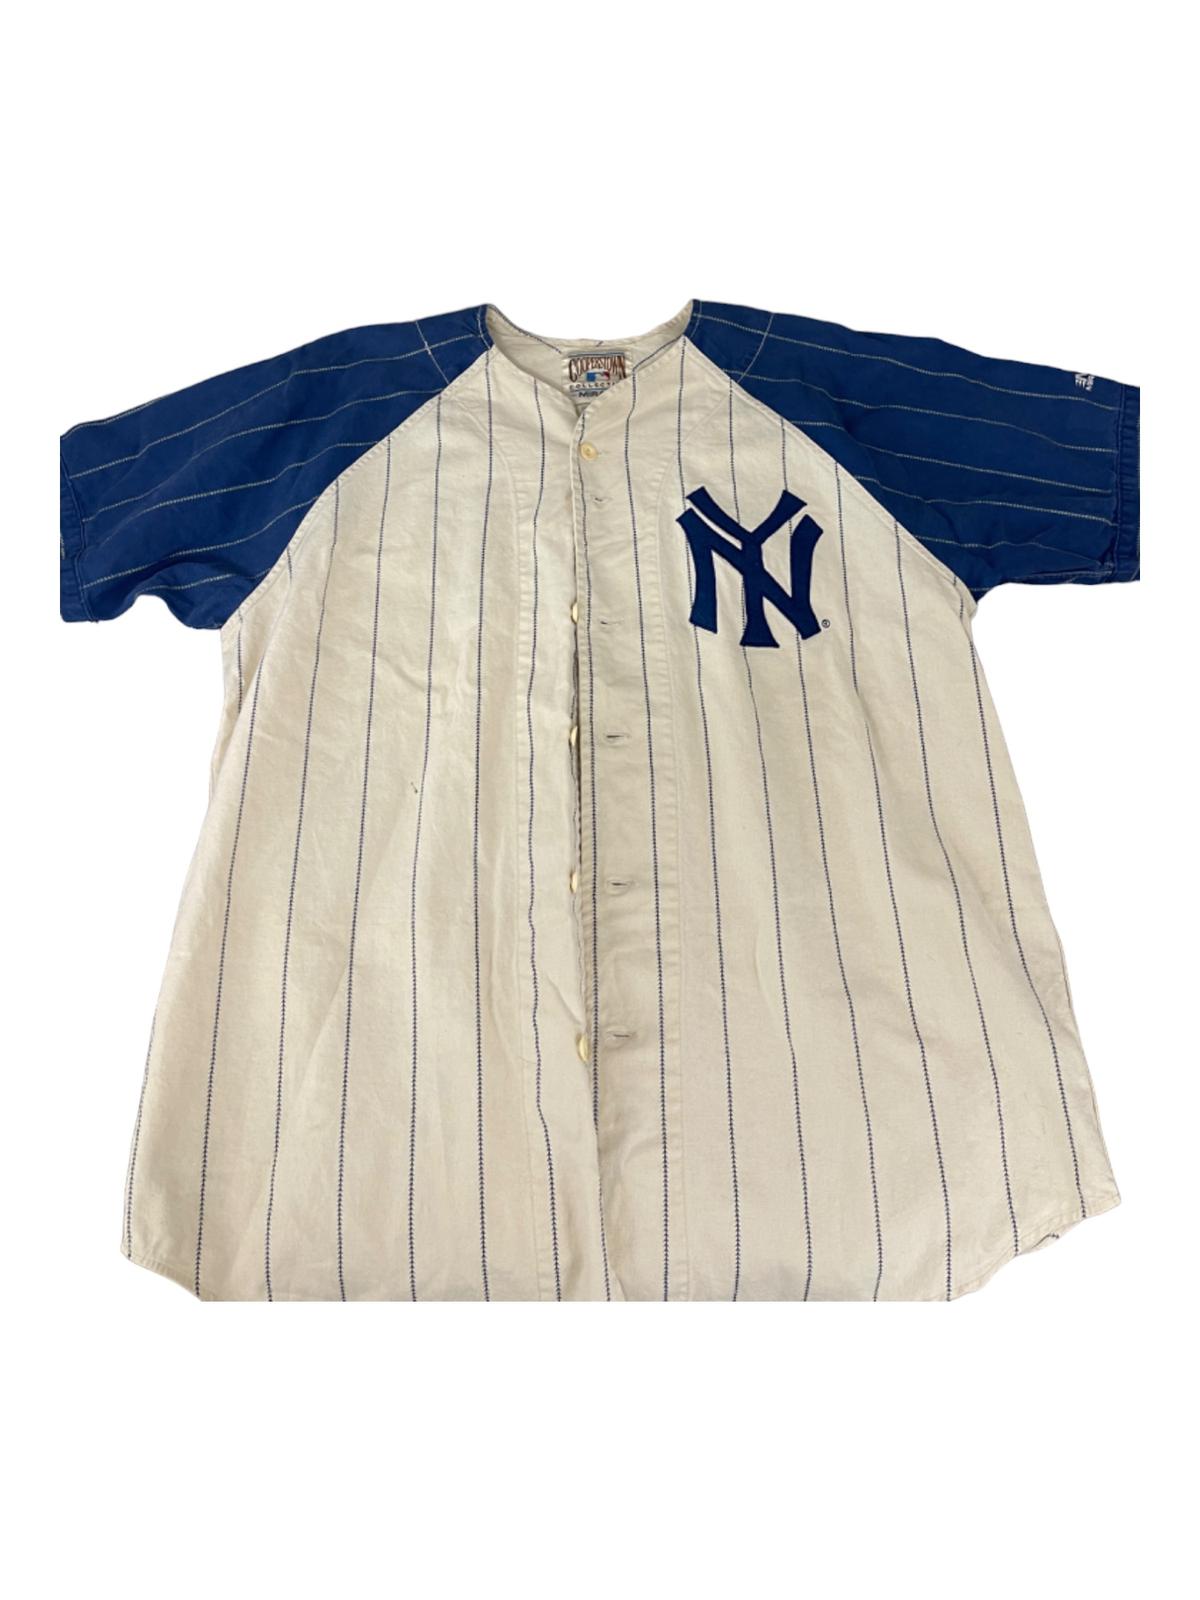 Babe Ruth Cooperstown Collection Yankees Babe Ruth Jersey